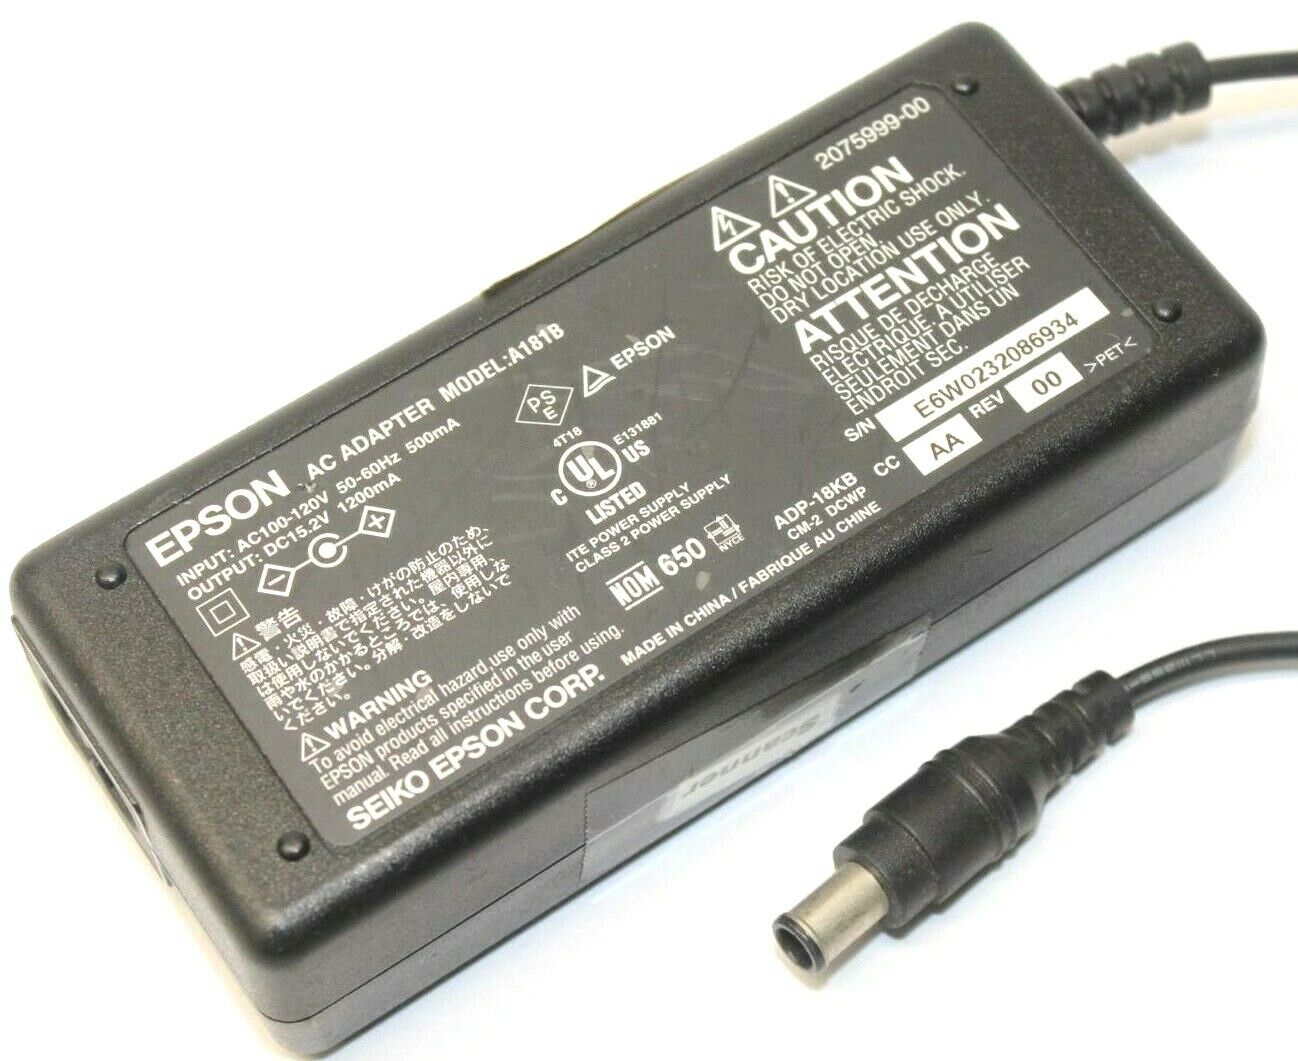 Epson A181B AC Adapter Power Supply Charger Cable 15.2 Volts 1200mA for Scanner